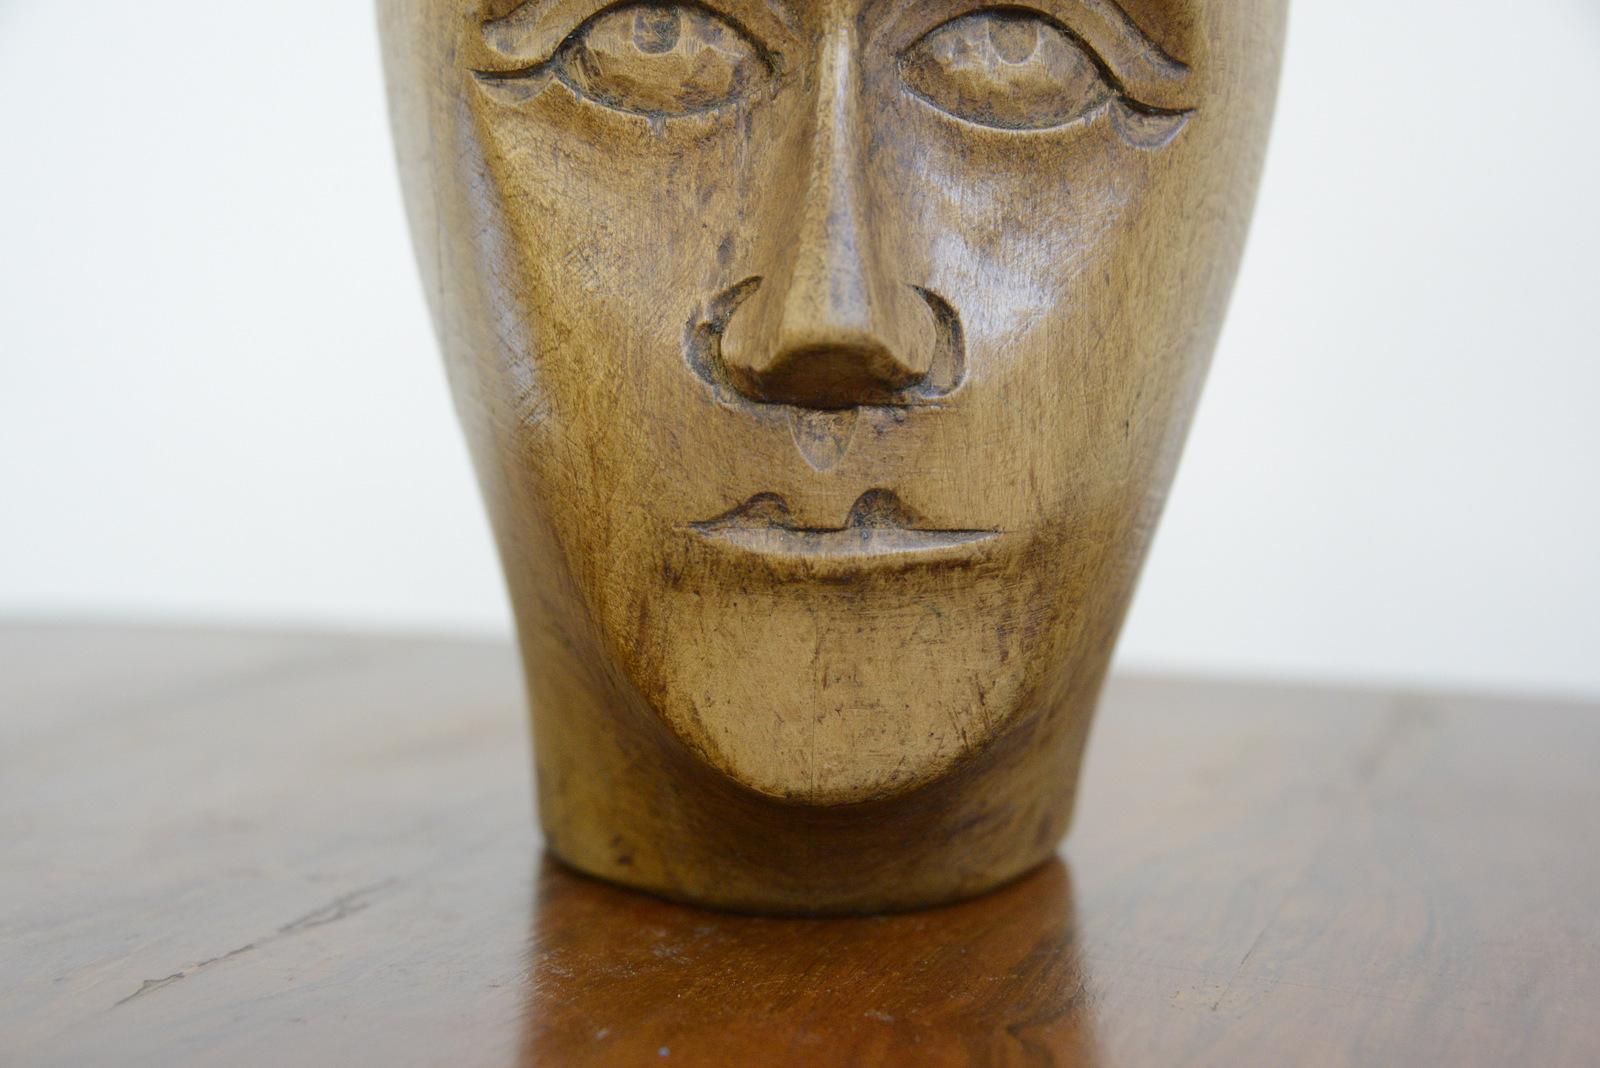 German carved wooden milliners head circa 1910

- Hand carved from sycamore
- Used in the displaying and making of hats
- German ~ 1910
- Measures: 25cm tall x 15cm wide x 18cm deep

Condition report

Signs of its previous in the form of